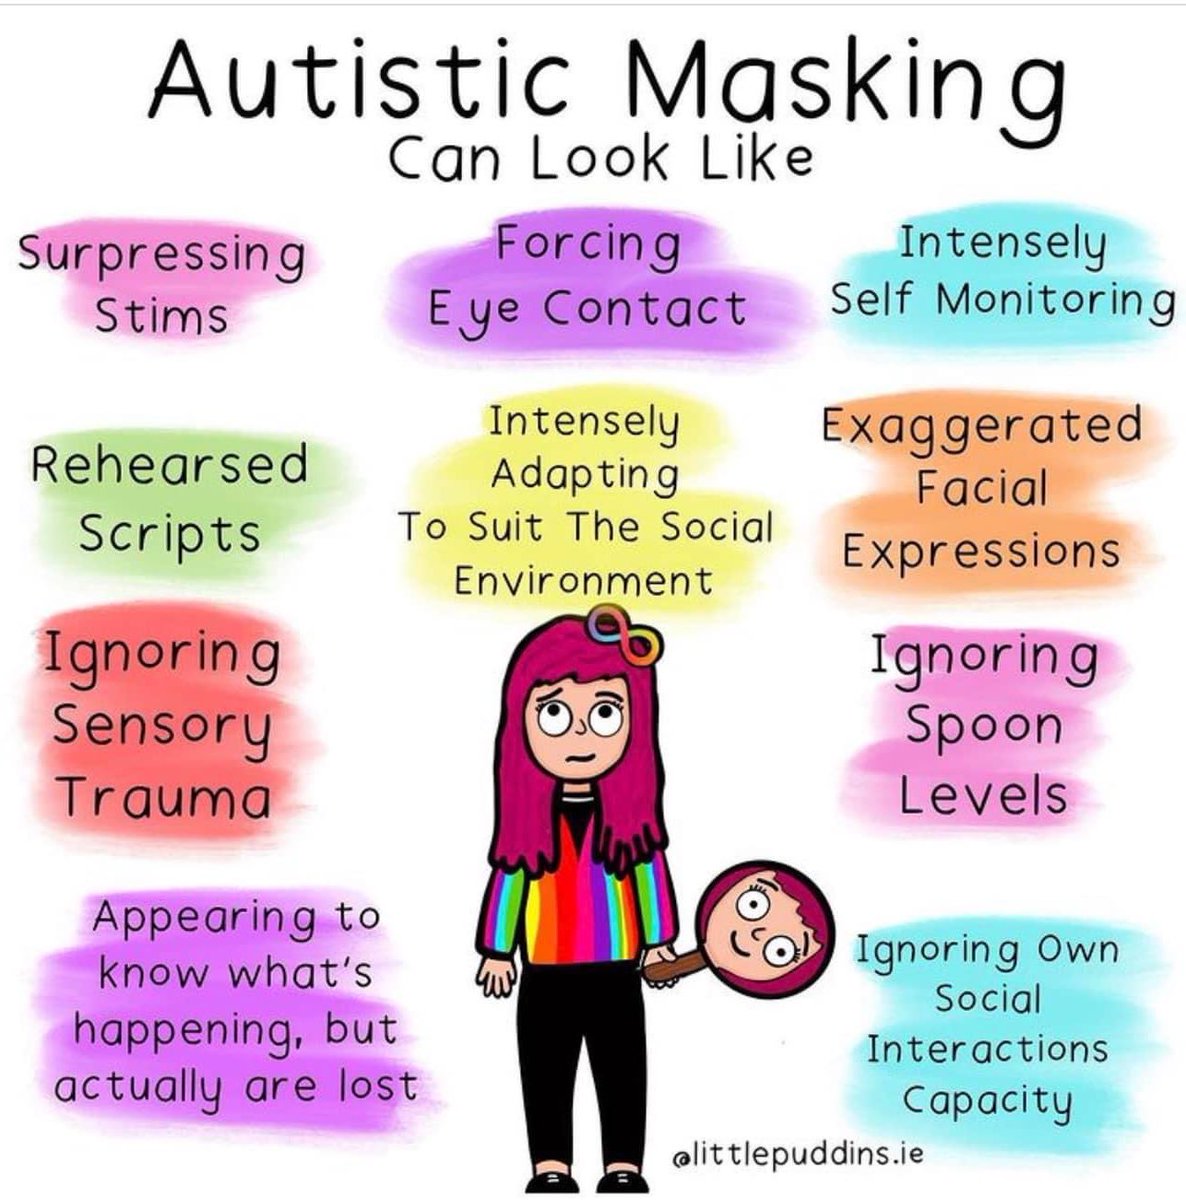 Autism-101 on Twitter: "Autistic masking behaviors vary from person to  person. What are some of your masking characteristics? #AskingAutistics  #ActuallyAutistic https://t.co/8h0kvGVONH" / Twitter